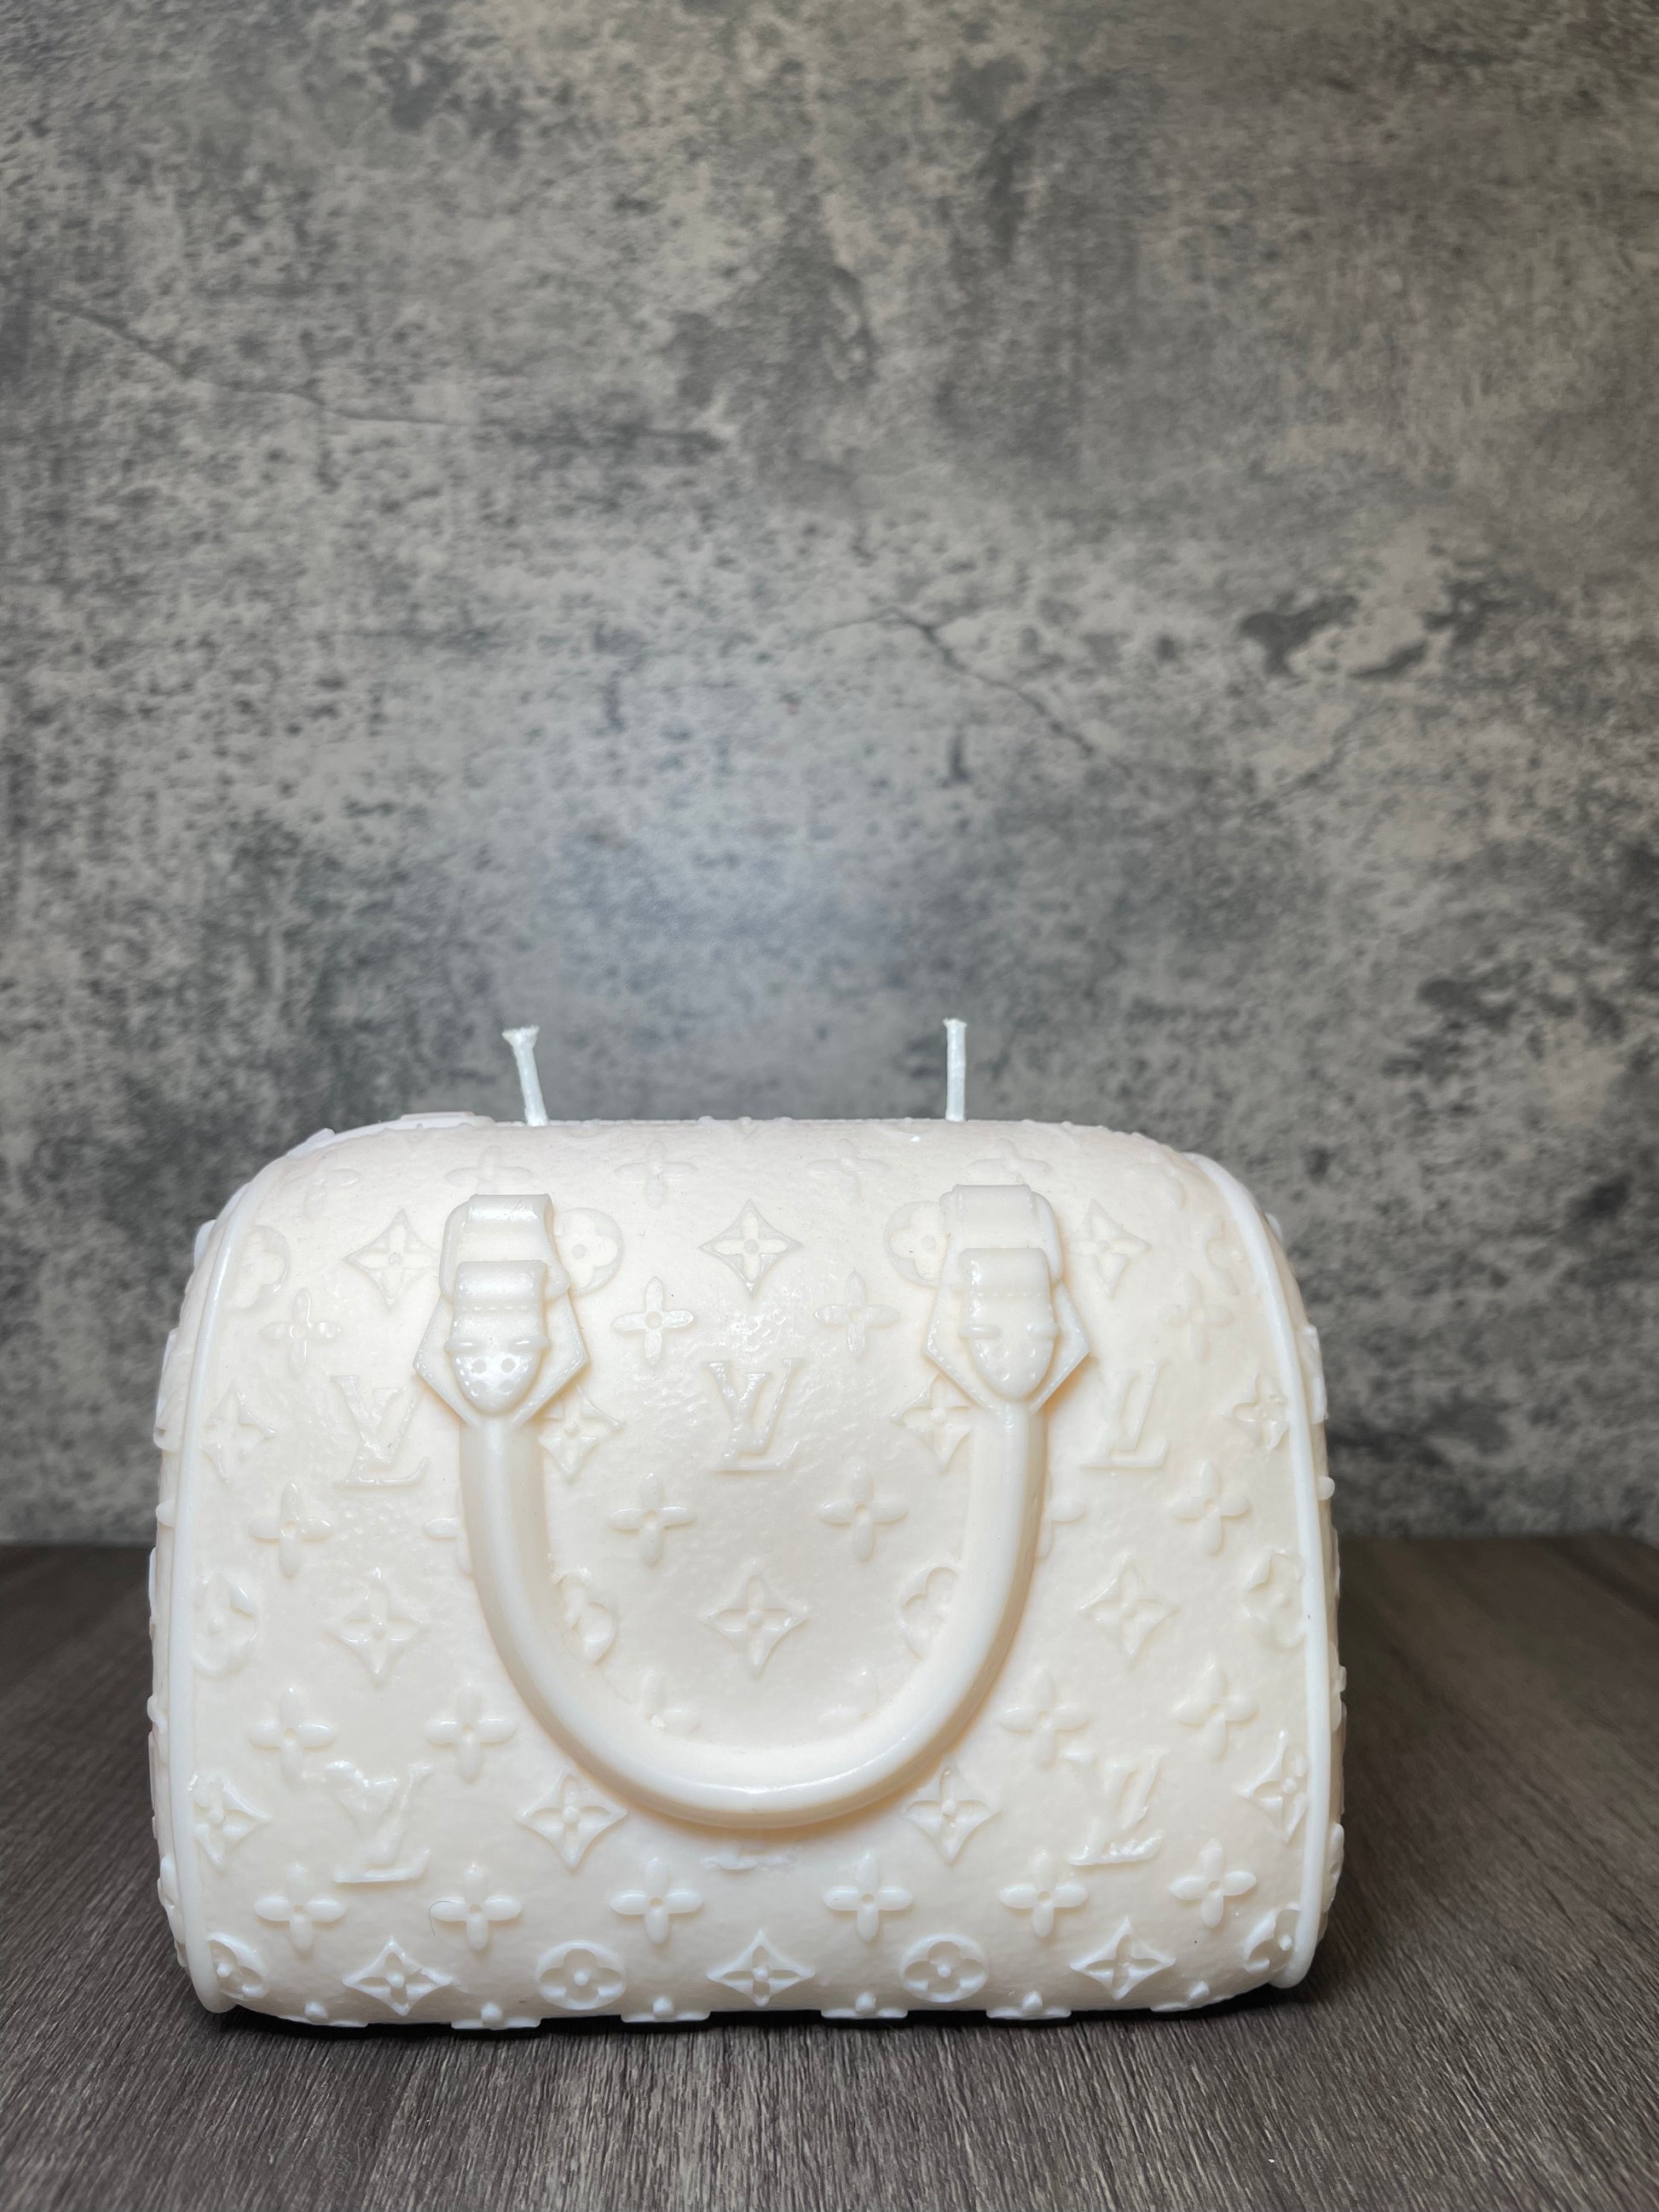 Louis Vuitton Is Selling Candles That Look Like Purses